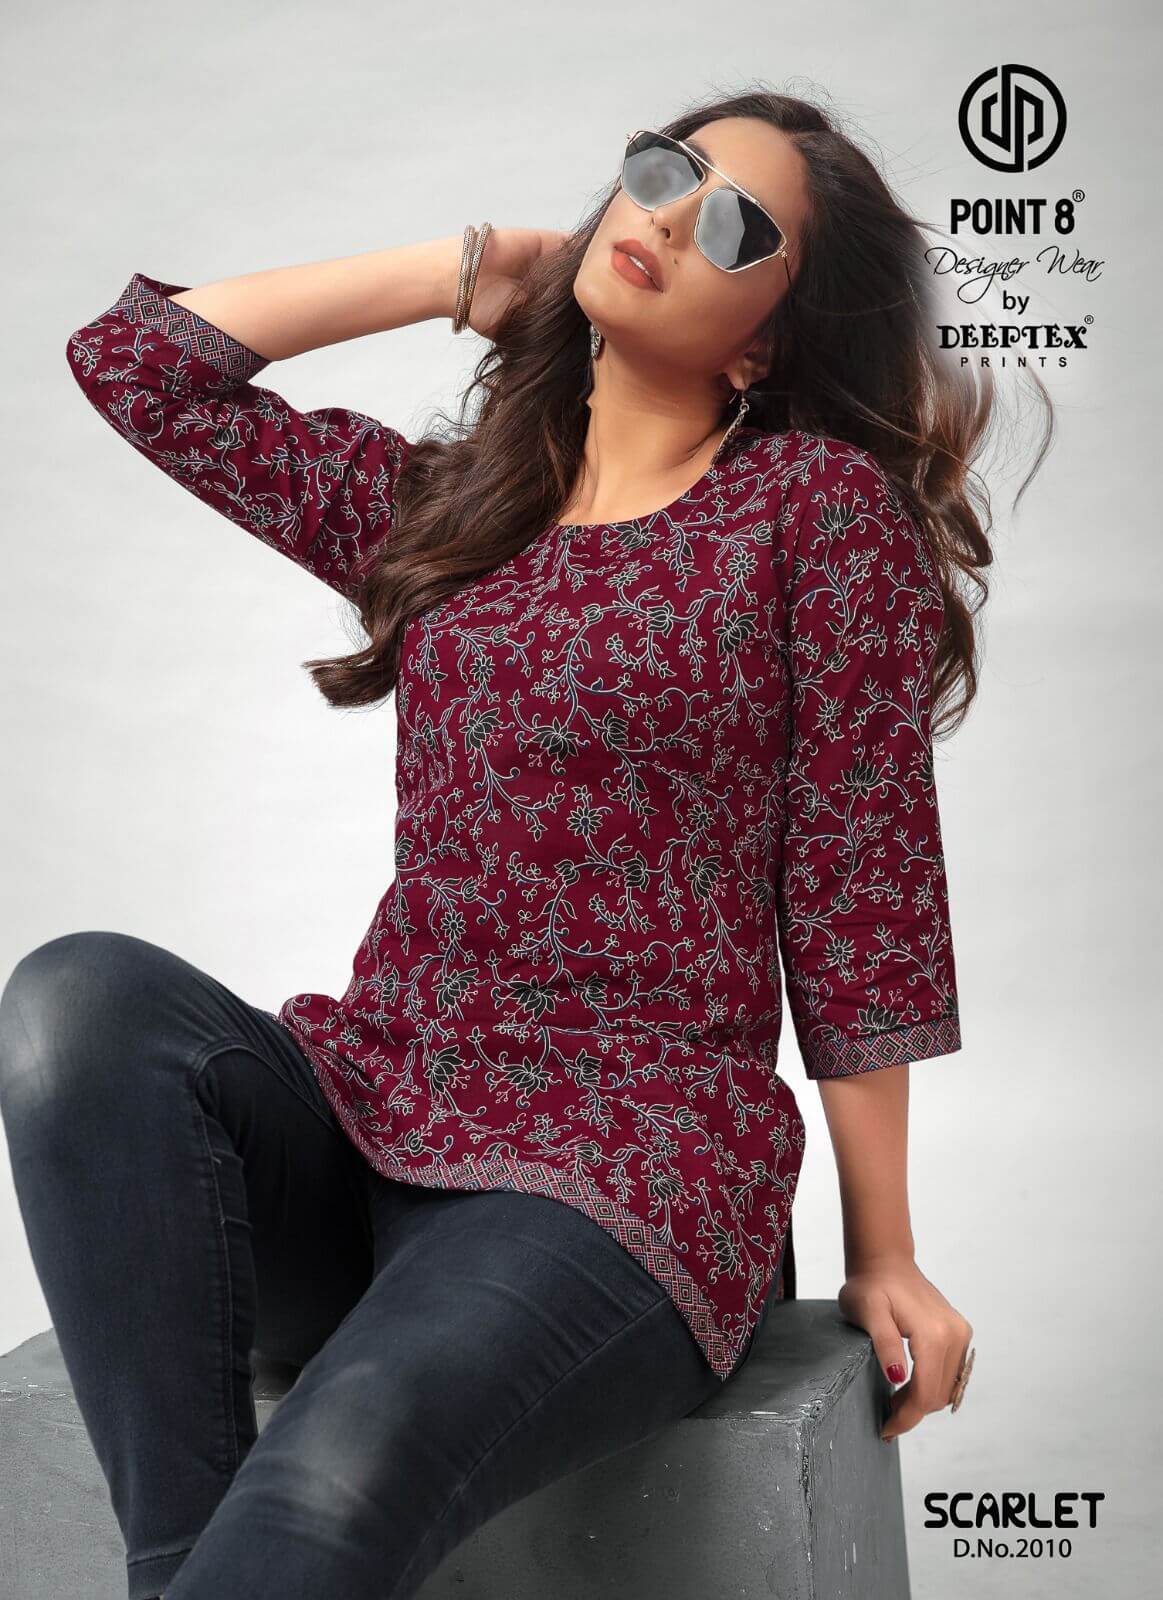 Deeptex Point 8 Scarlet vol 2 Ladies Tops Catalog collection 1